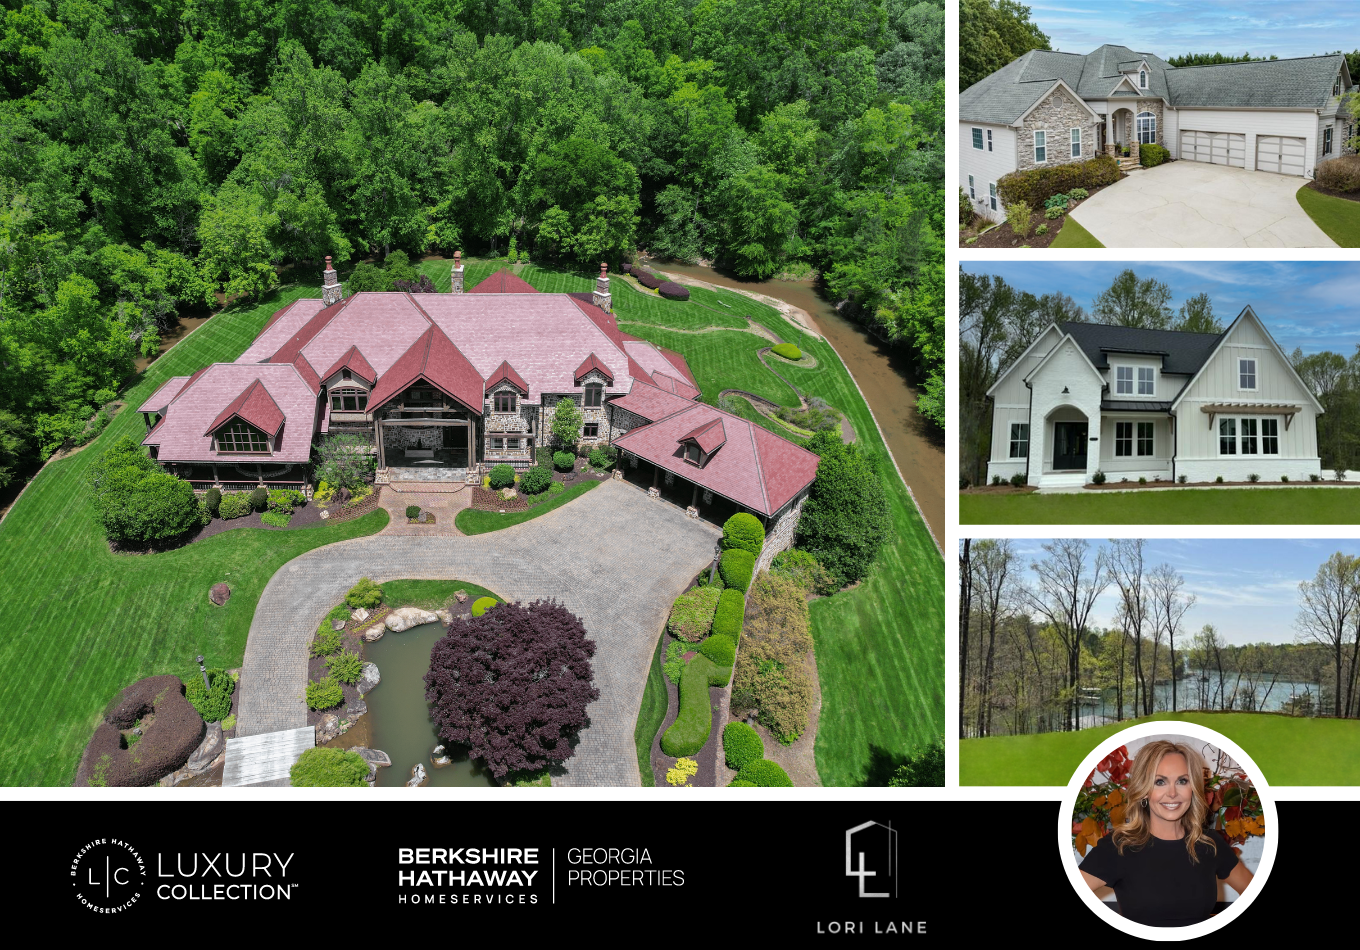 Luxury Collection - Berkshire Hathaway HomeServices GA Properties, Friday, May 26, 2023, Press release picture